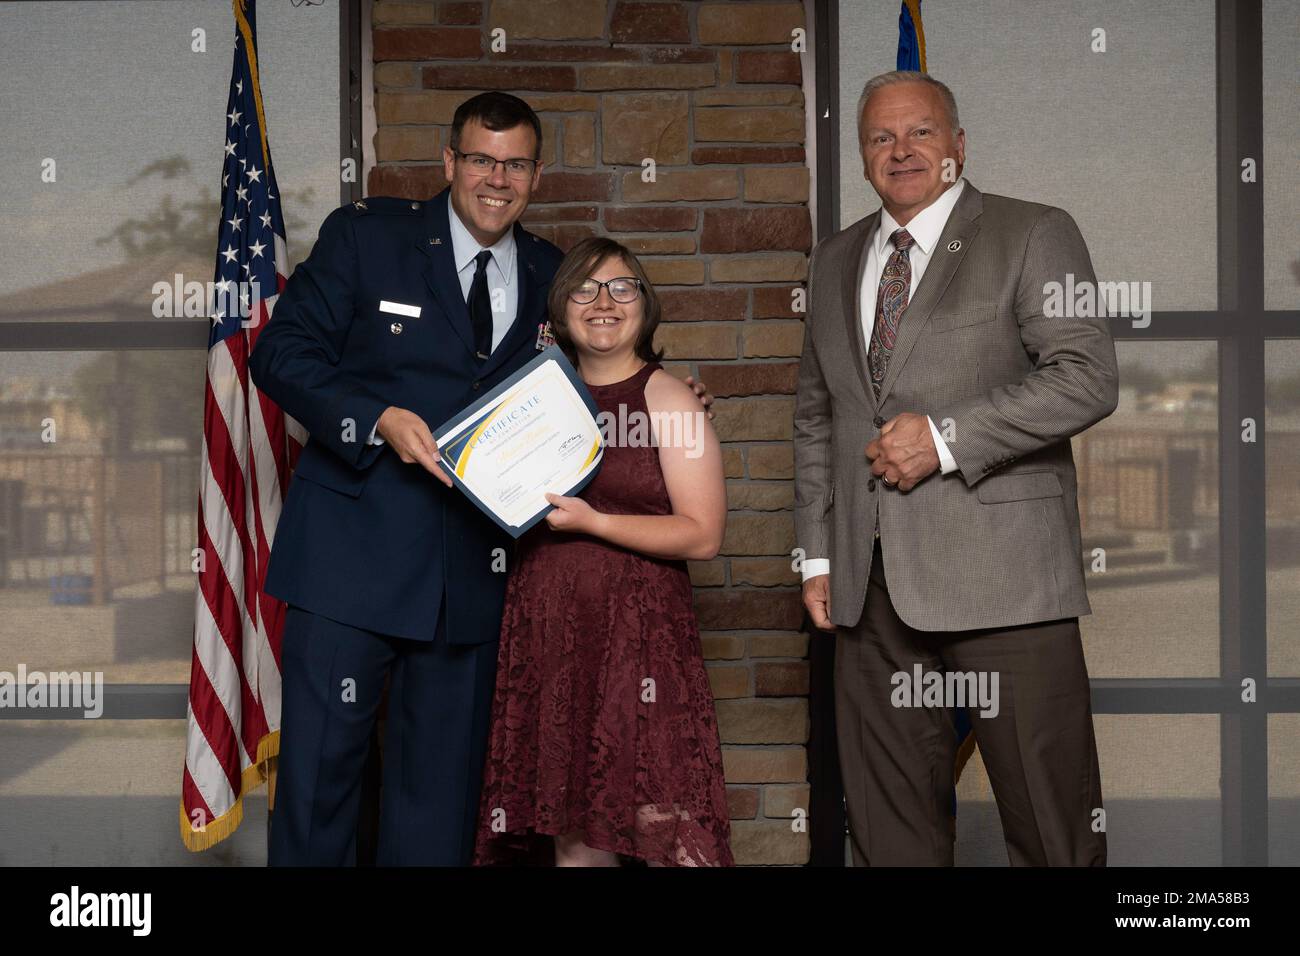 Alyssa Bailey, Project SEARCH intern, receives graduation certificate, May 24, 2022, on Holloman Air Force Base, New Mexico. Project SEARCH is a year-long internship to help intellectually disabled high school graduates develop job skills. Stock Photo